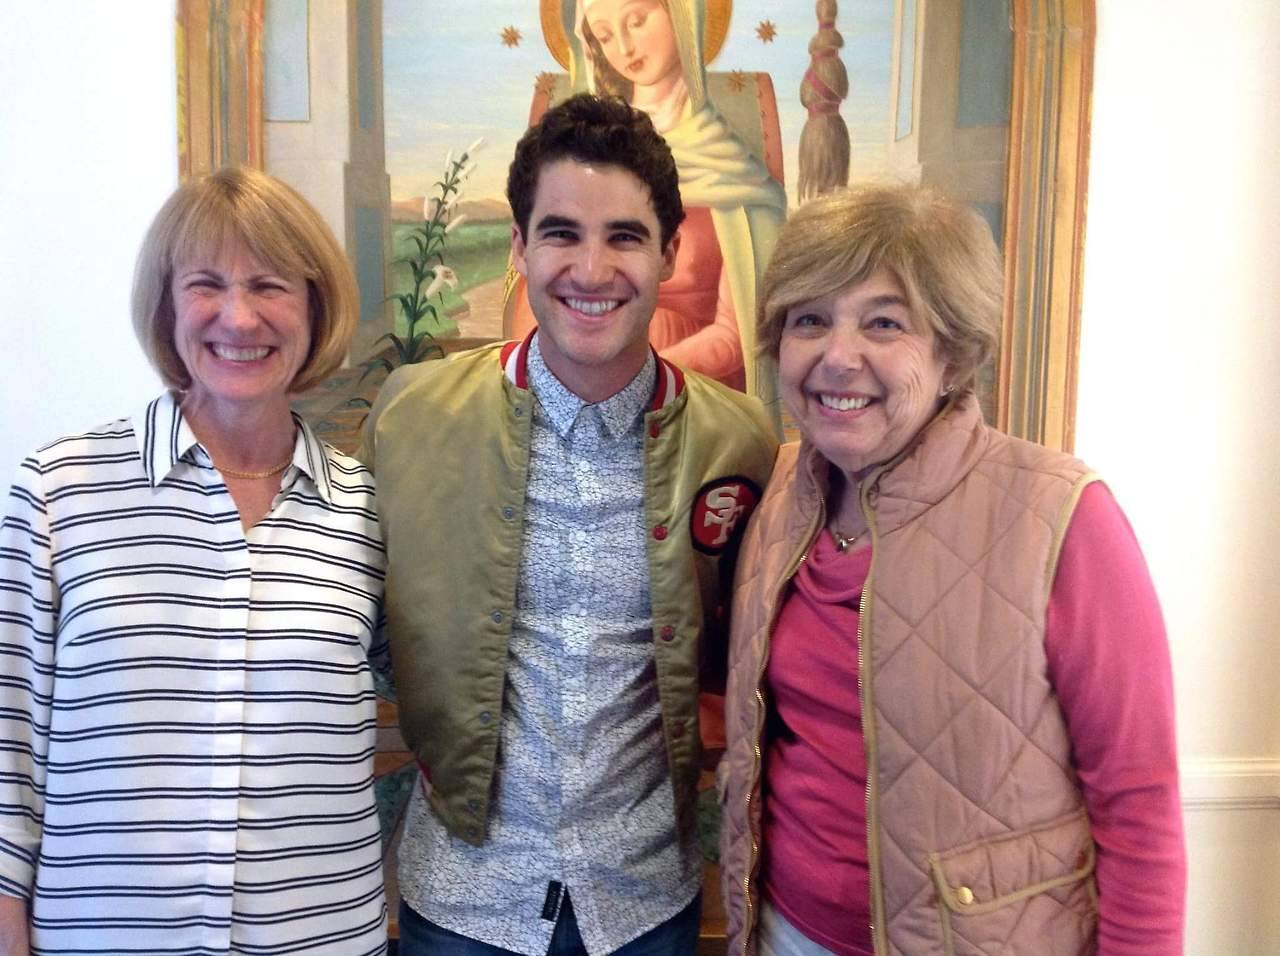 blaineisprettyrad - Pics, gifs, media videos, curtain call videos, stage door videos, and posts of "who saw Darren" in Hedwig and the Angry Inch--SF and L.A. (Tour),  - Page 7 Tumblr_ot1zk69KpQ1wpi2k2o1_1280